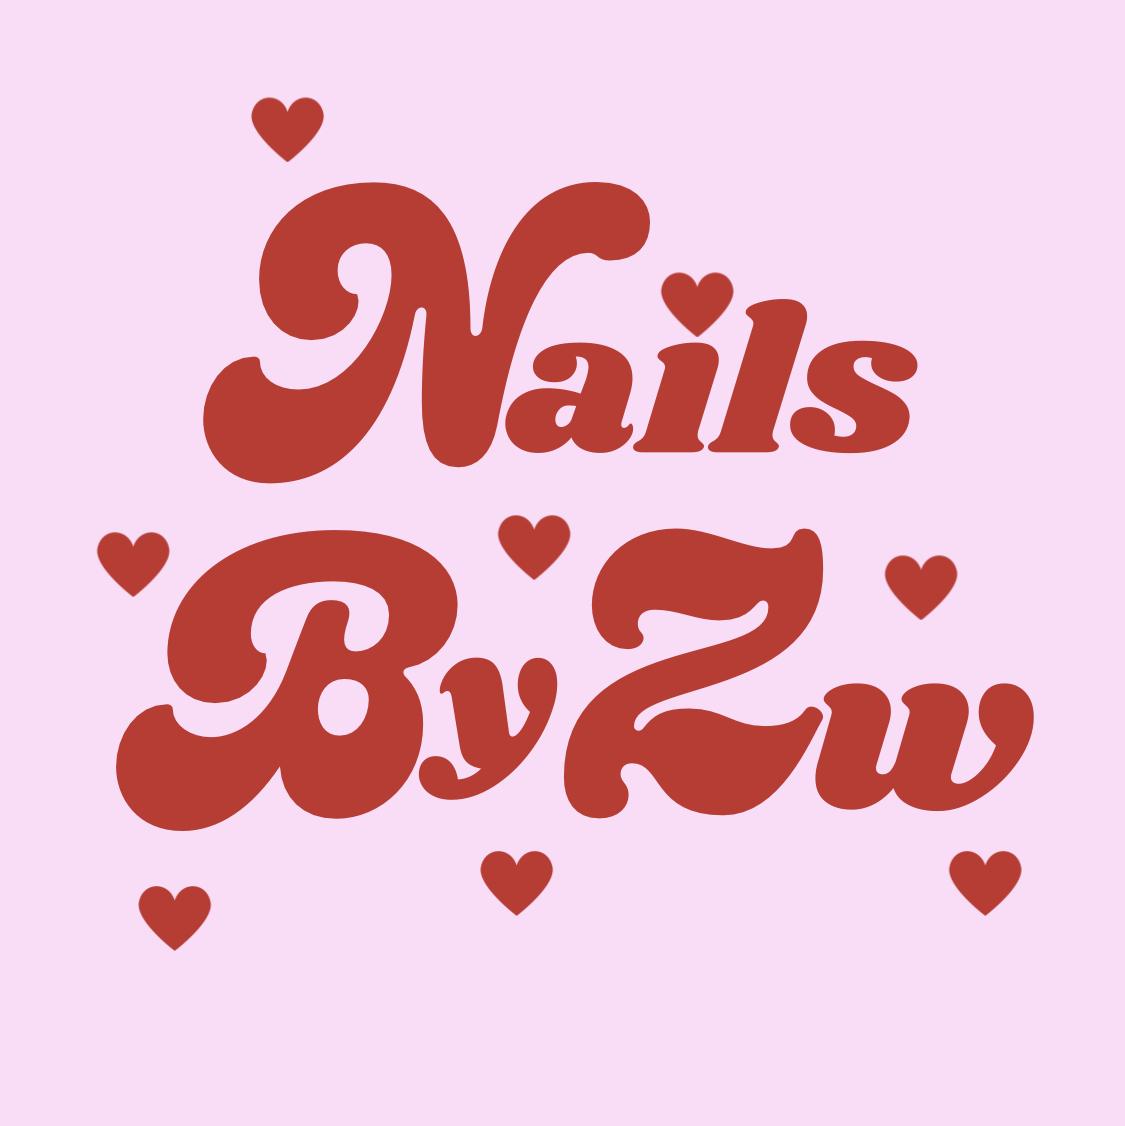 nailsbyzw 's images